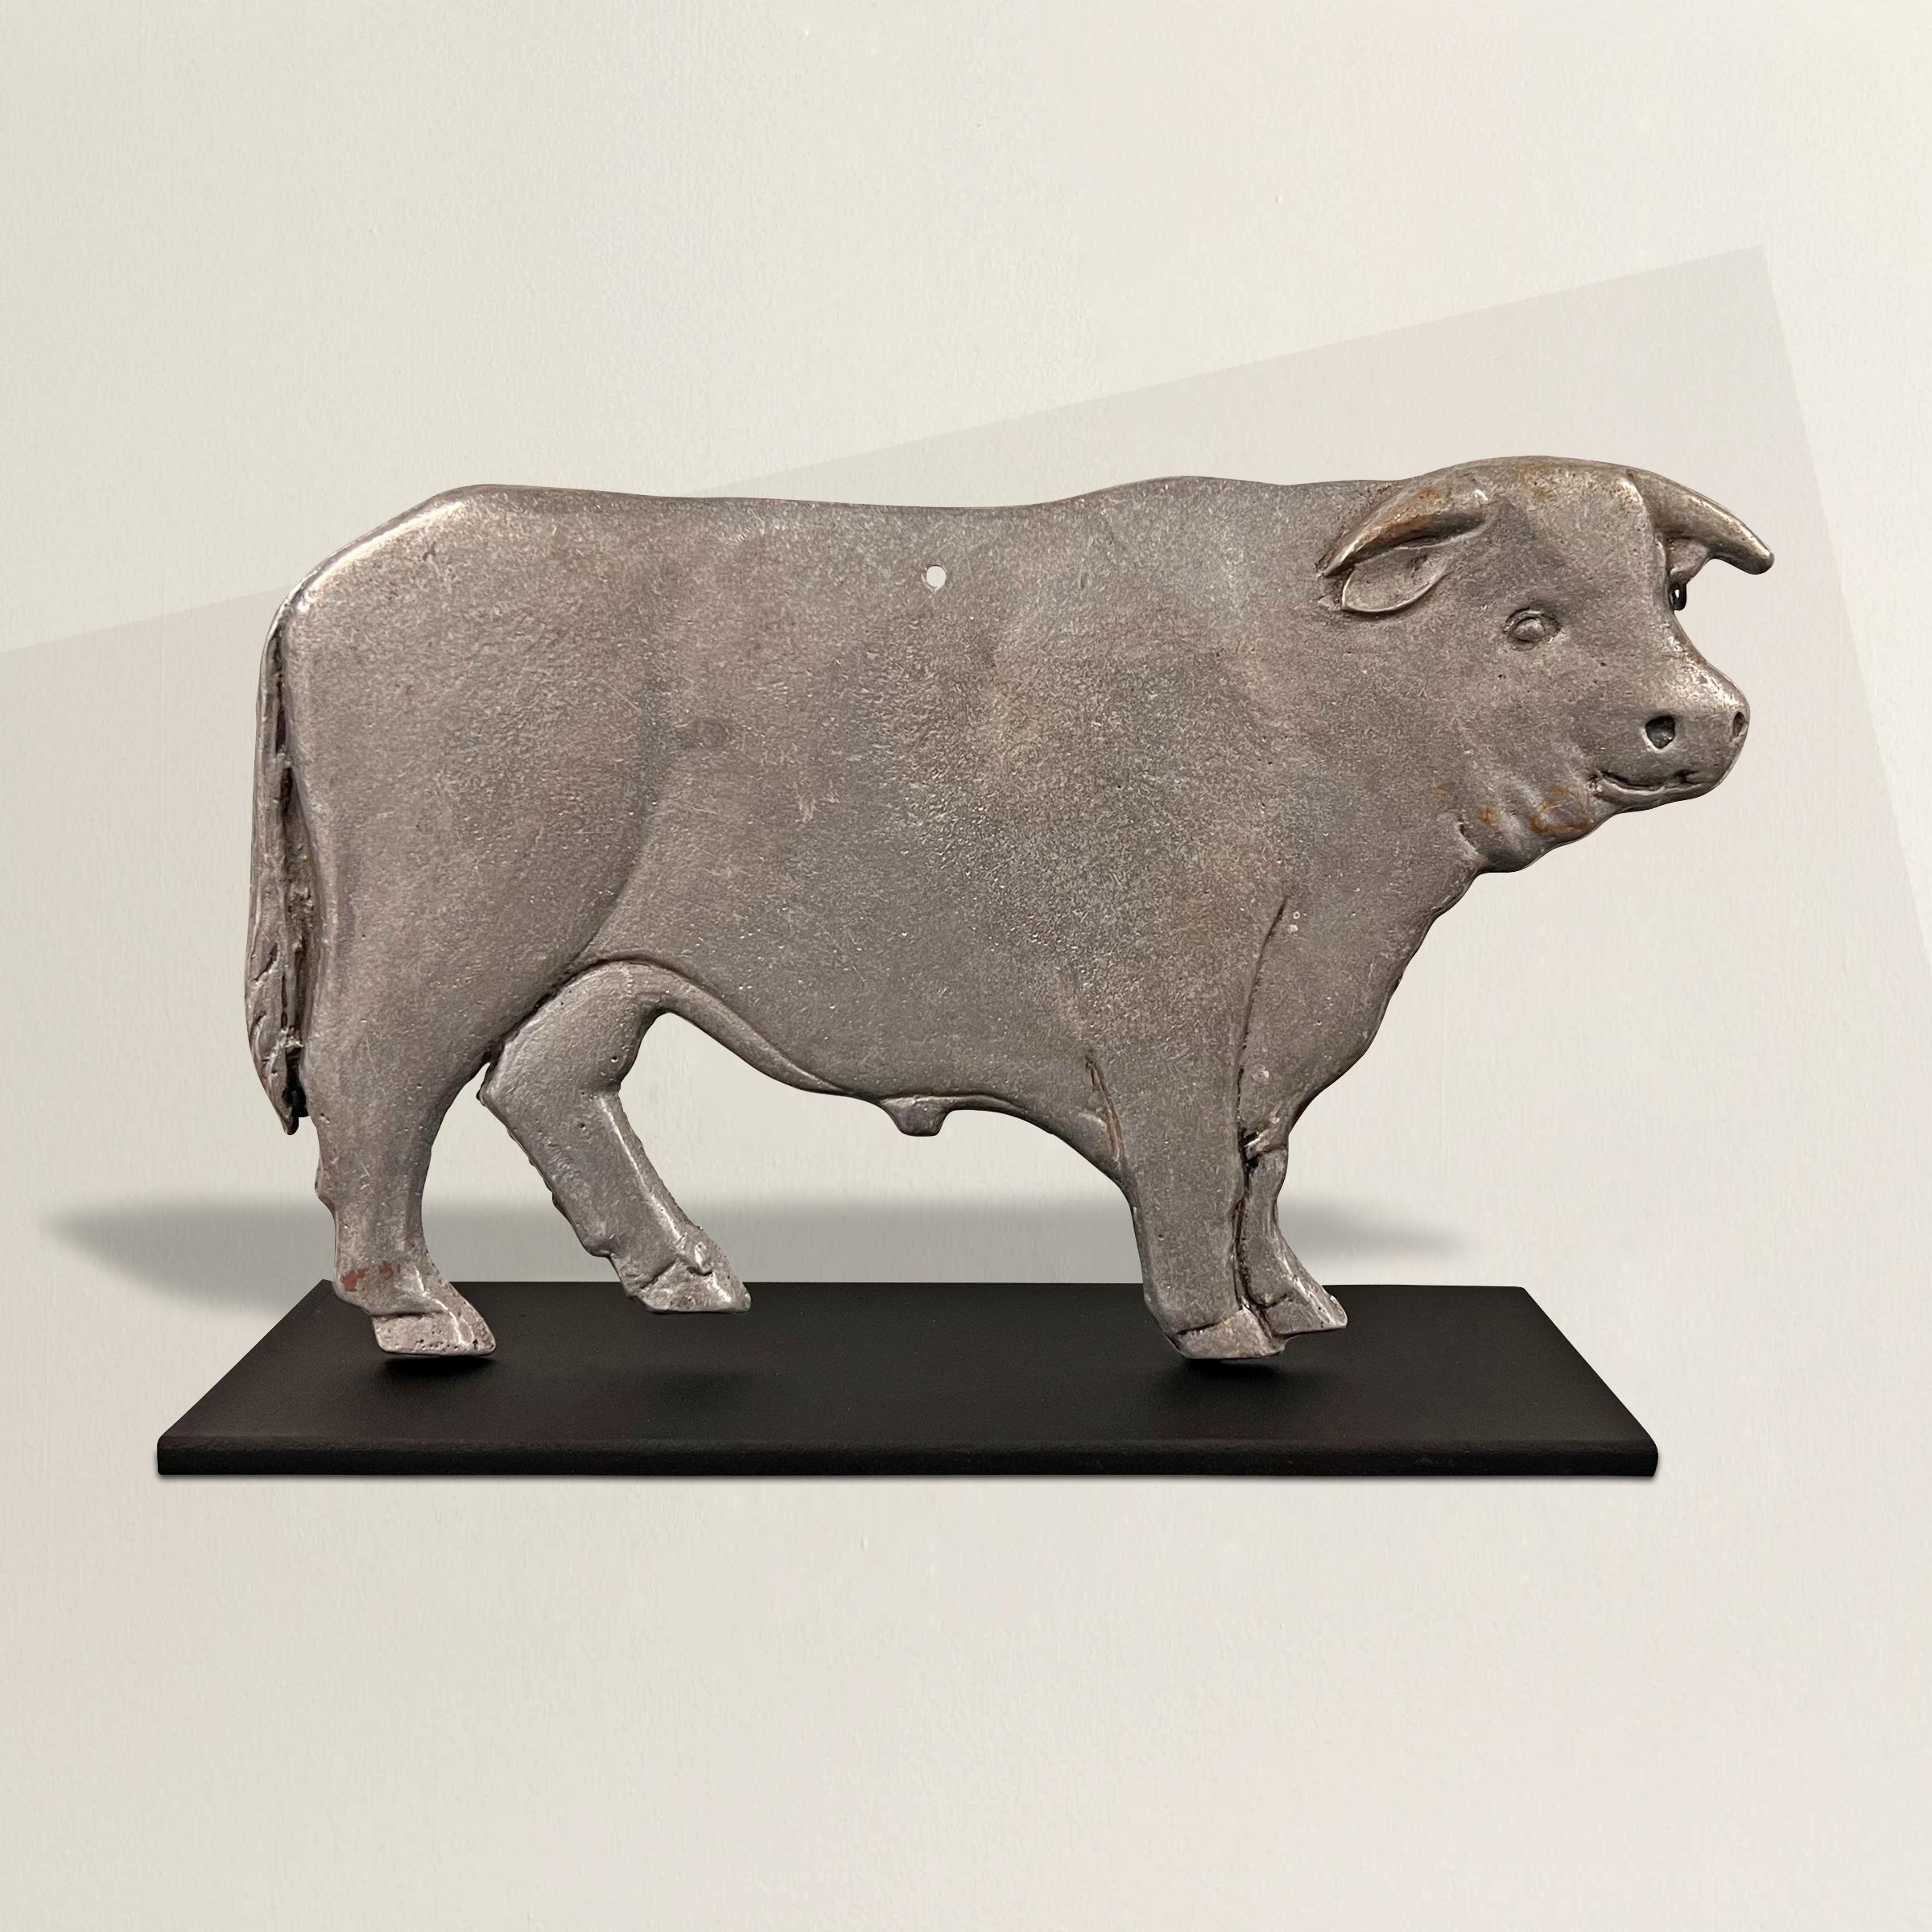 A charming early 20th century American cast aluminum bull plaque from a butcher's shop, now mounted on a custom steel stand so it can be displayed anywhere in your home.